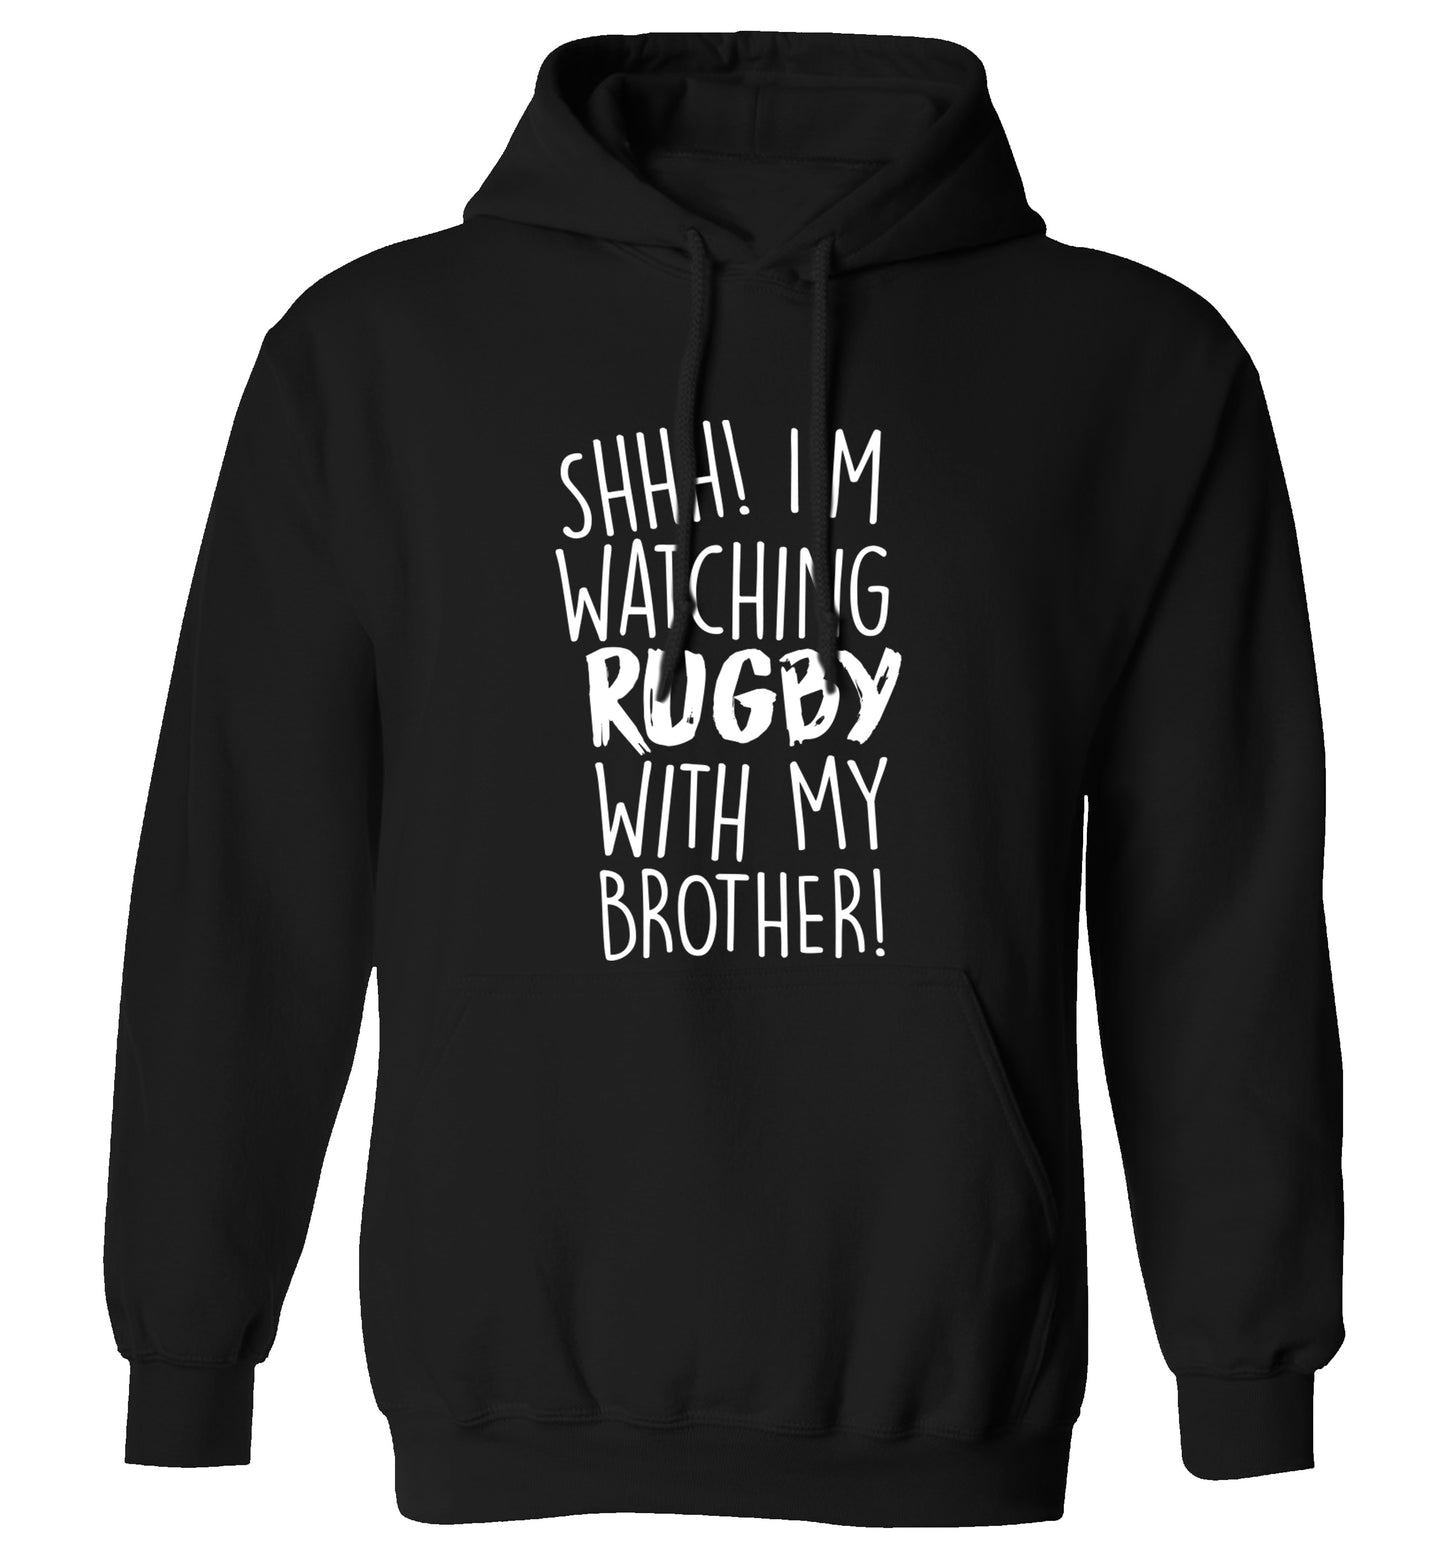 Shh... I'm watching rugby with my brother adults unisex black hoodie 2XL